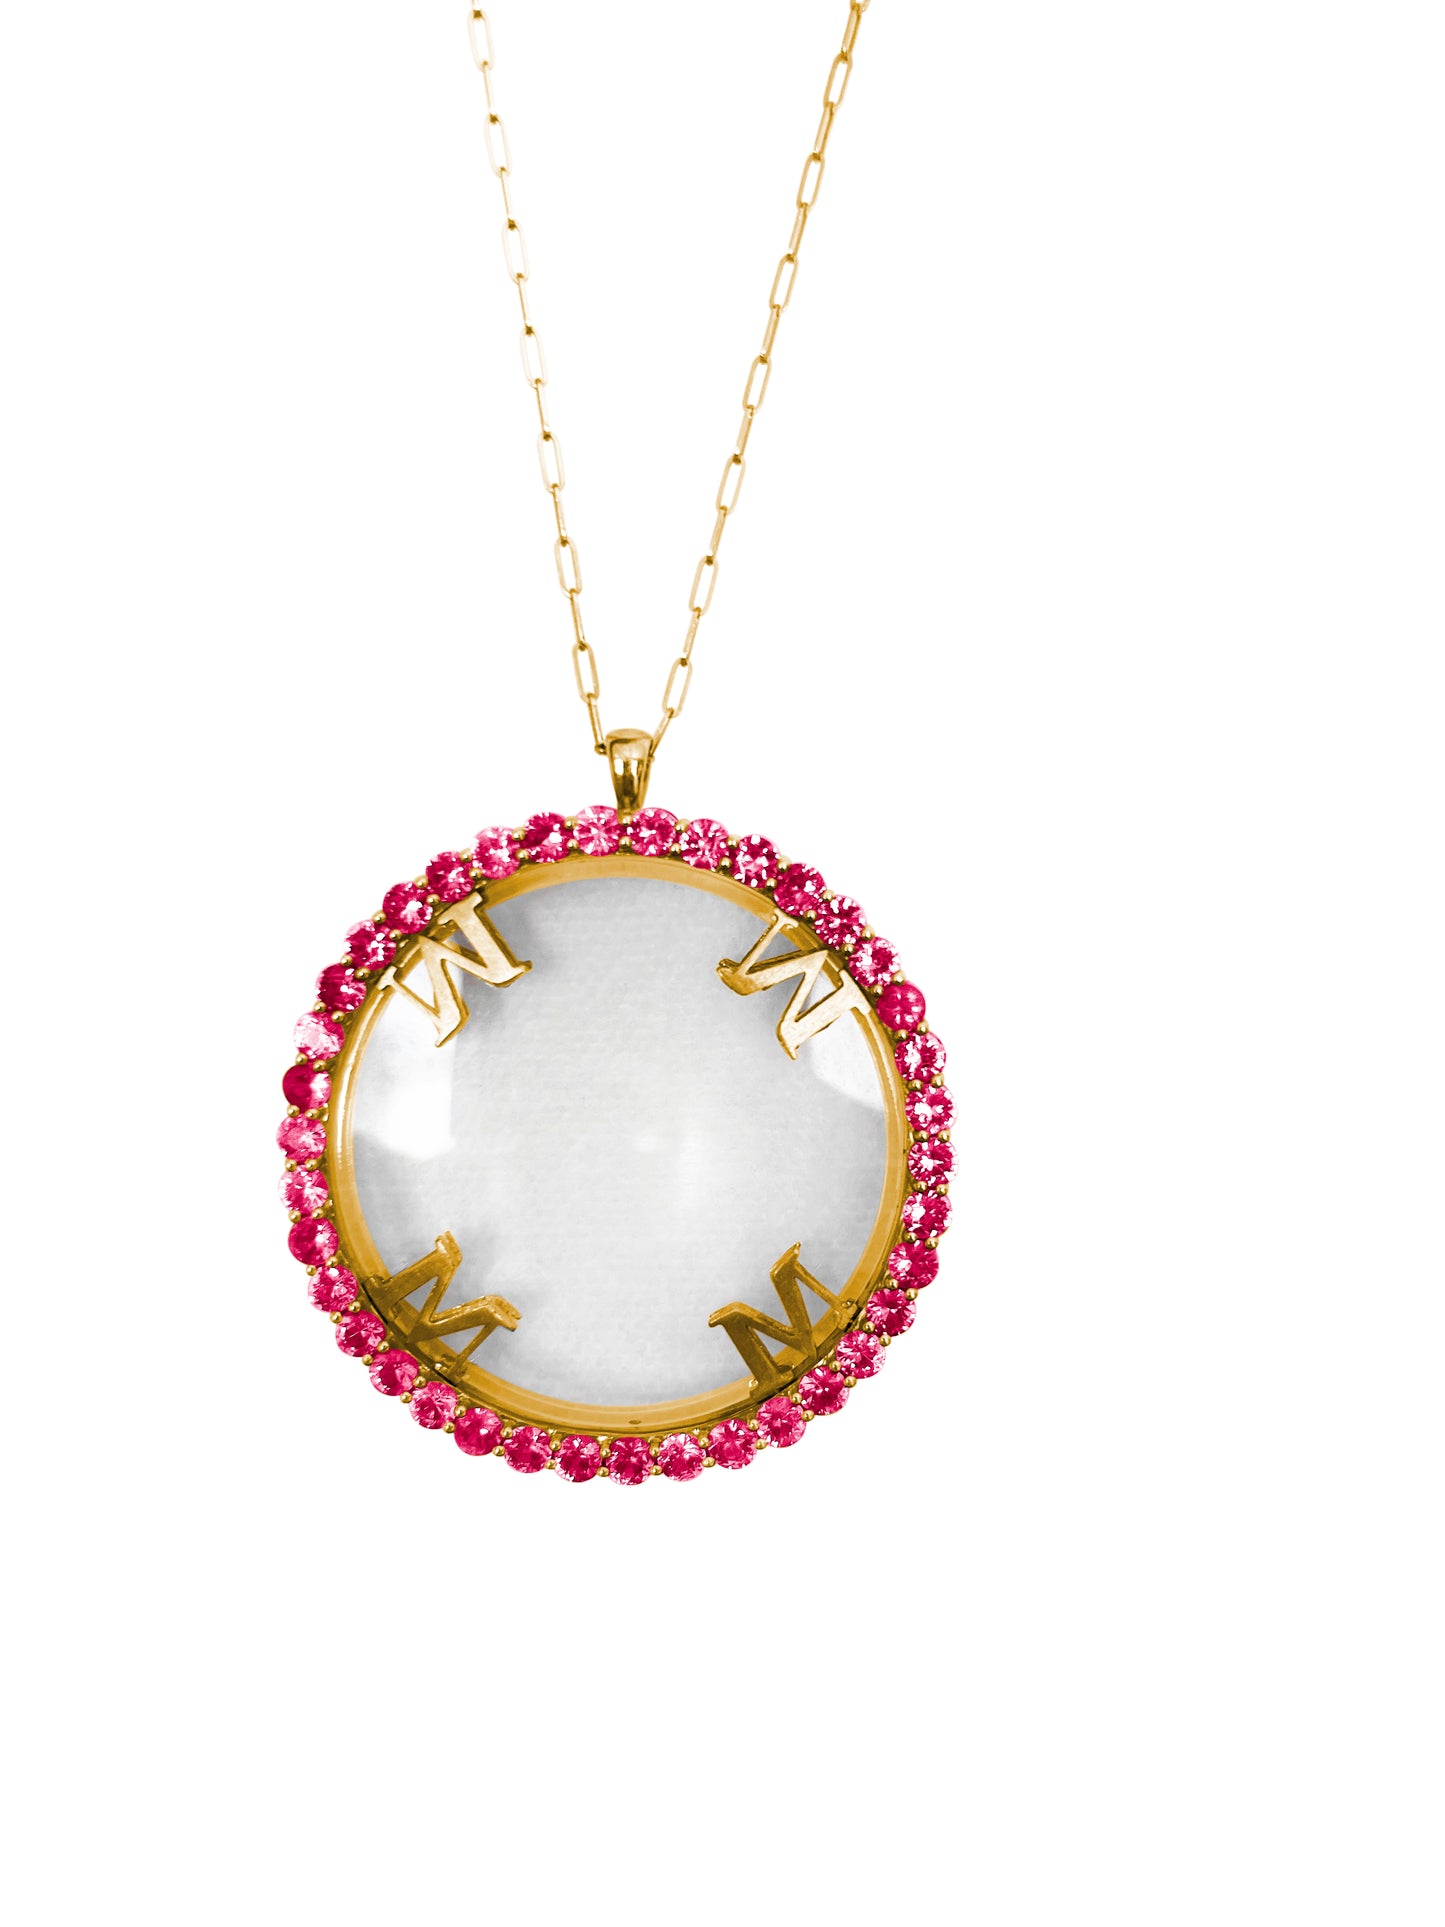 Magnifique Necklace Yellow Gold with Ruby